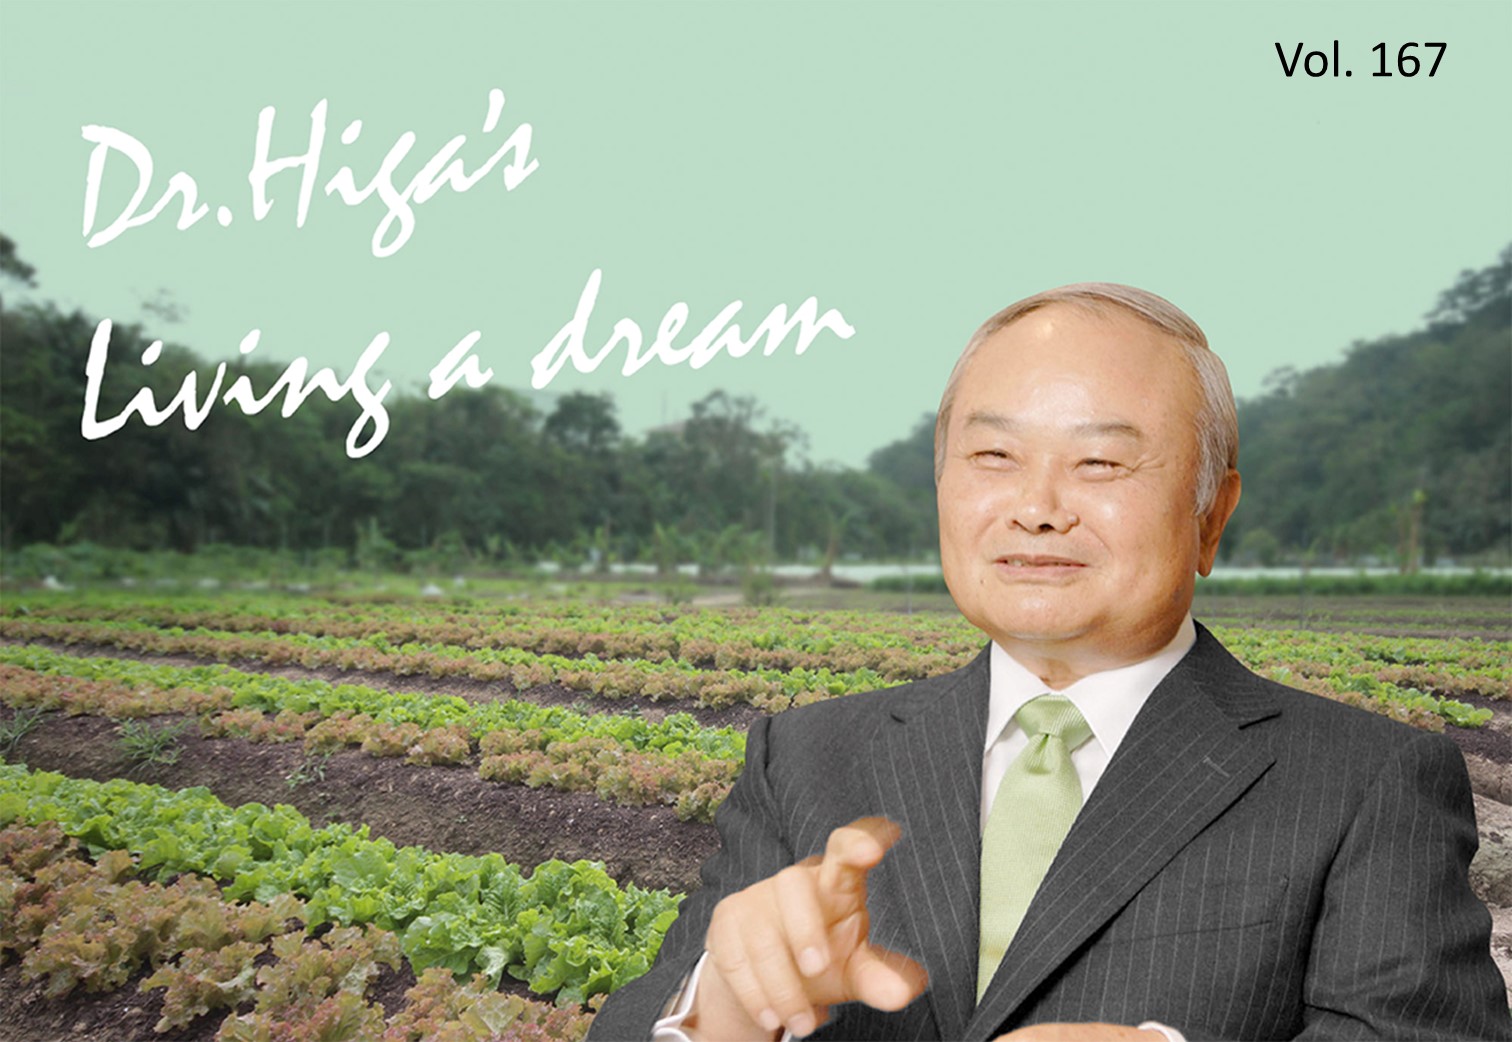 Dr. Higa's "Living a Dream": the latest article #167 is up!!!